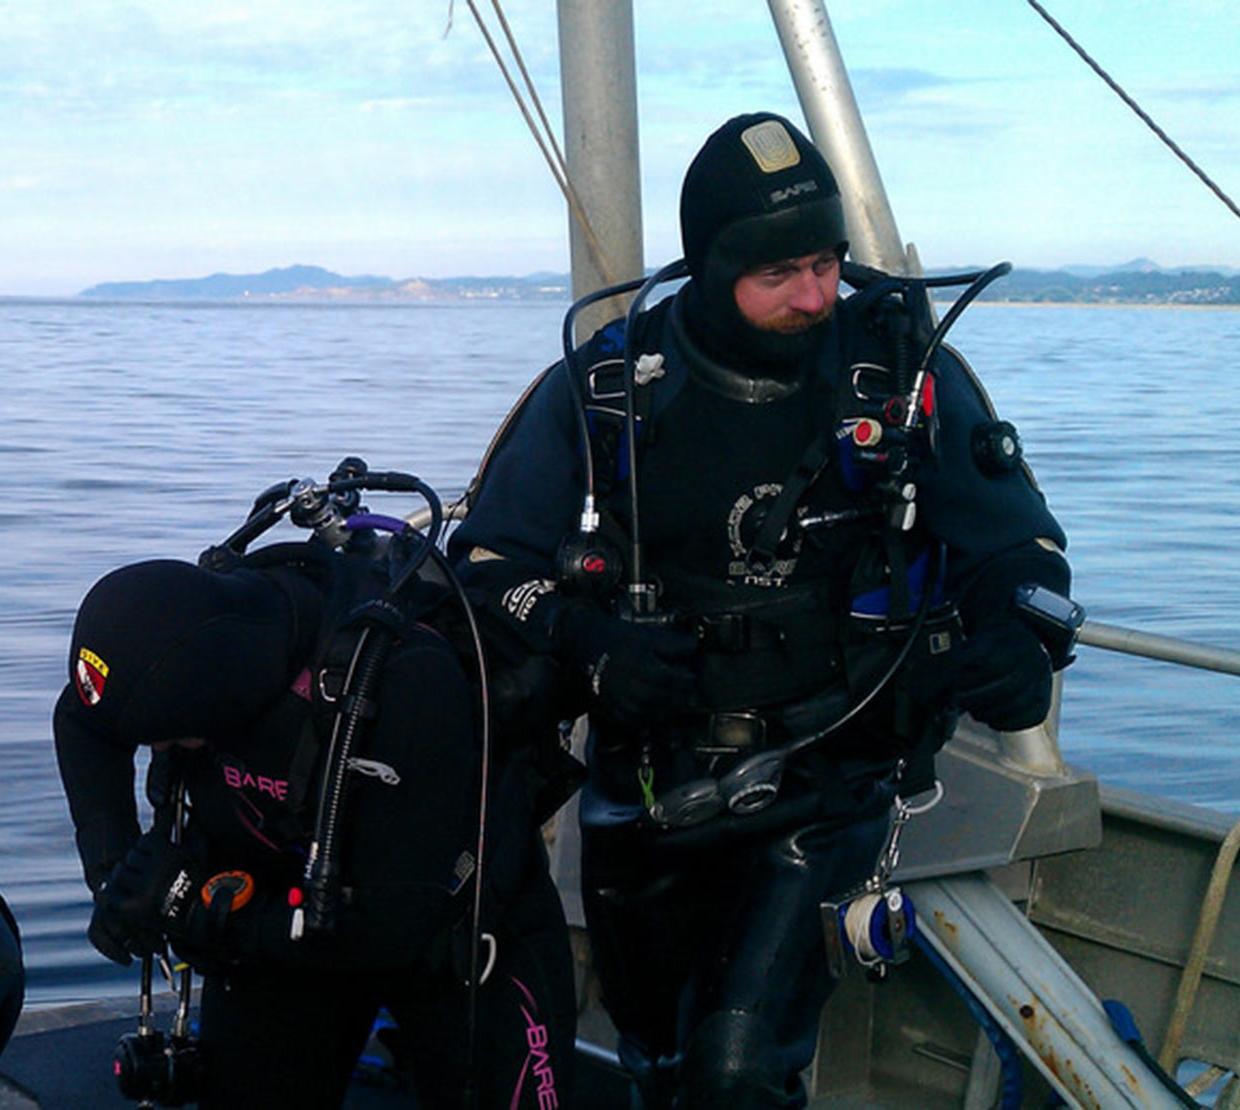 Scuba divers standing on edge of boat on sea